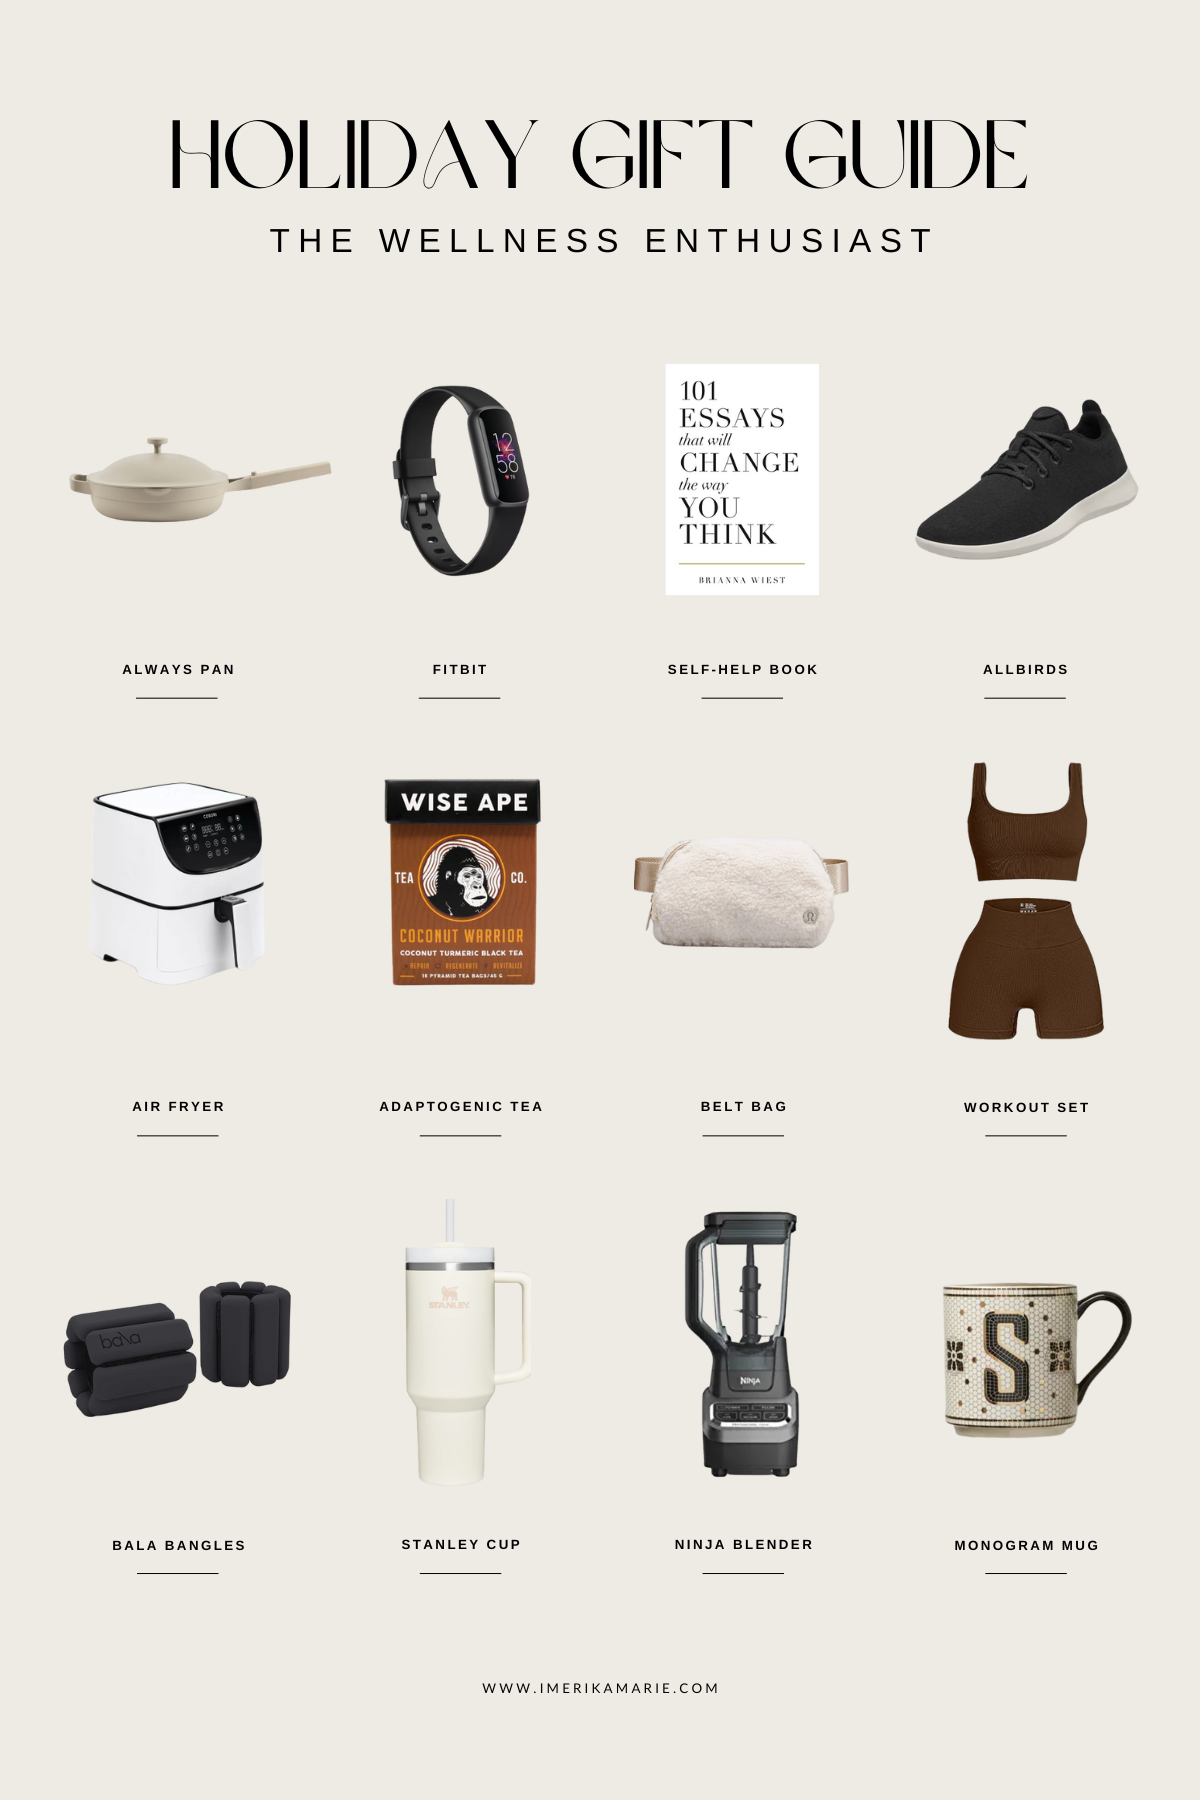 Holiday Gift Guide for the Wellness Enthusiast